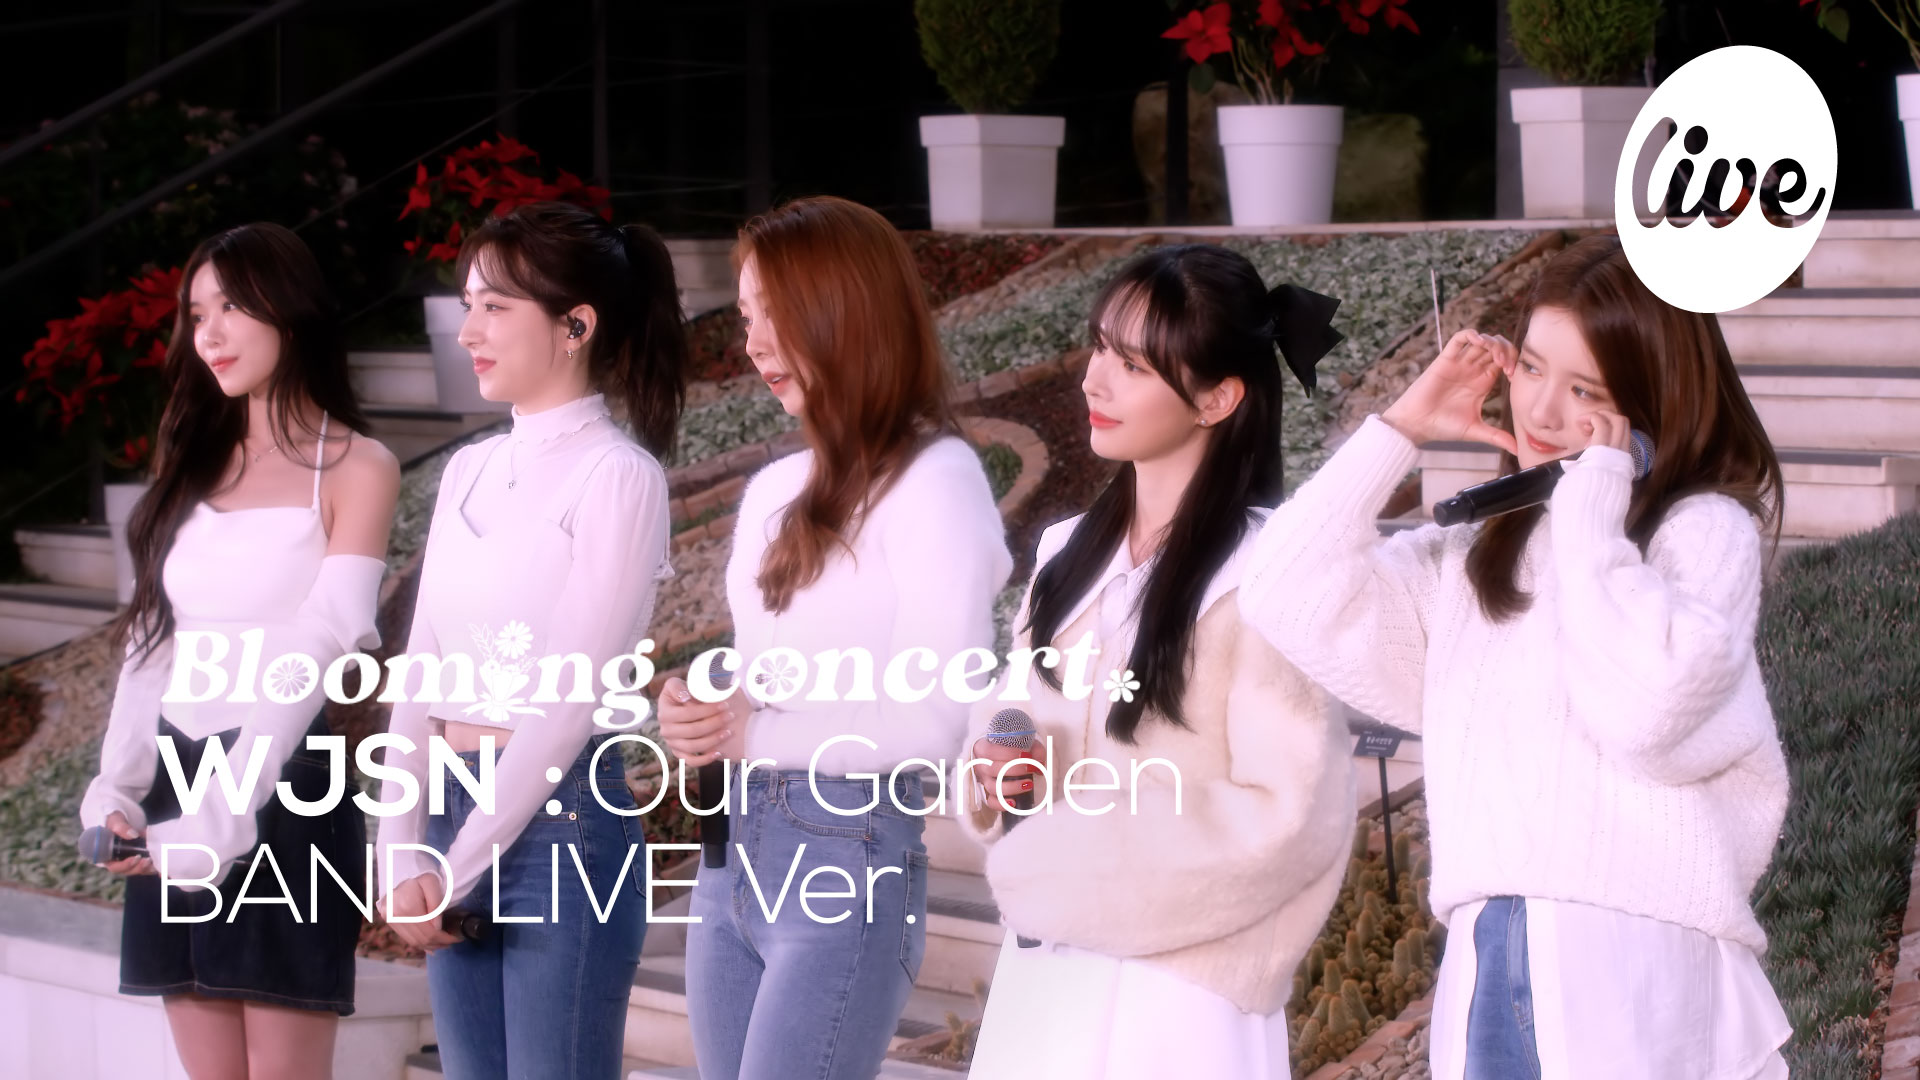 Youtube thumbnail for the linked video, showing 5 members of WJSN dressed in white for the live performance of 'You & I'.